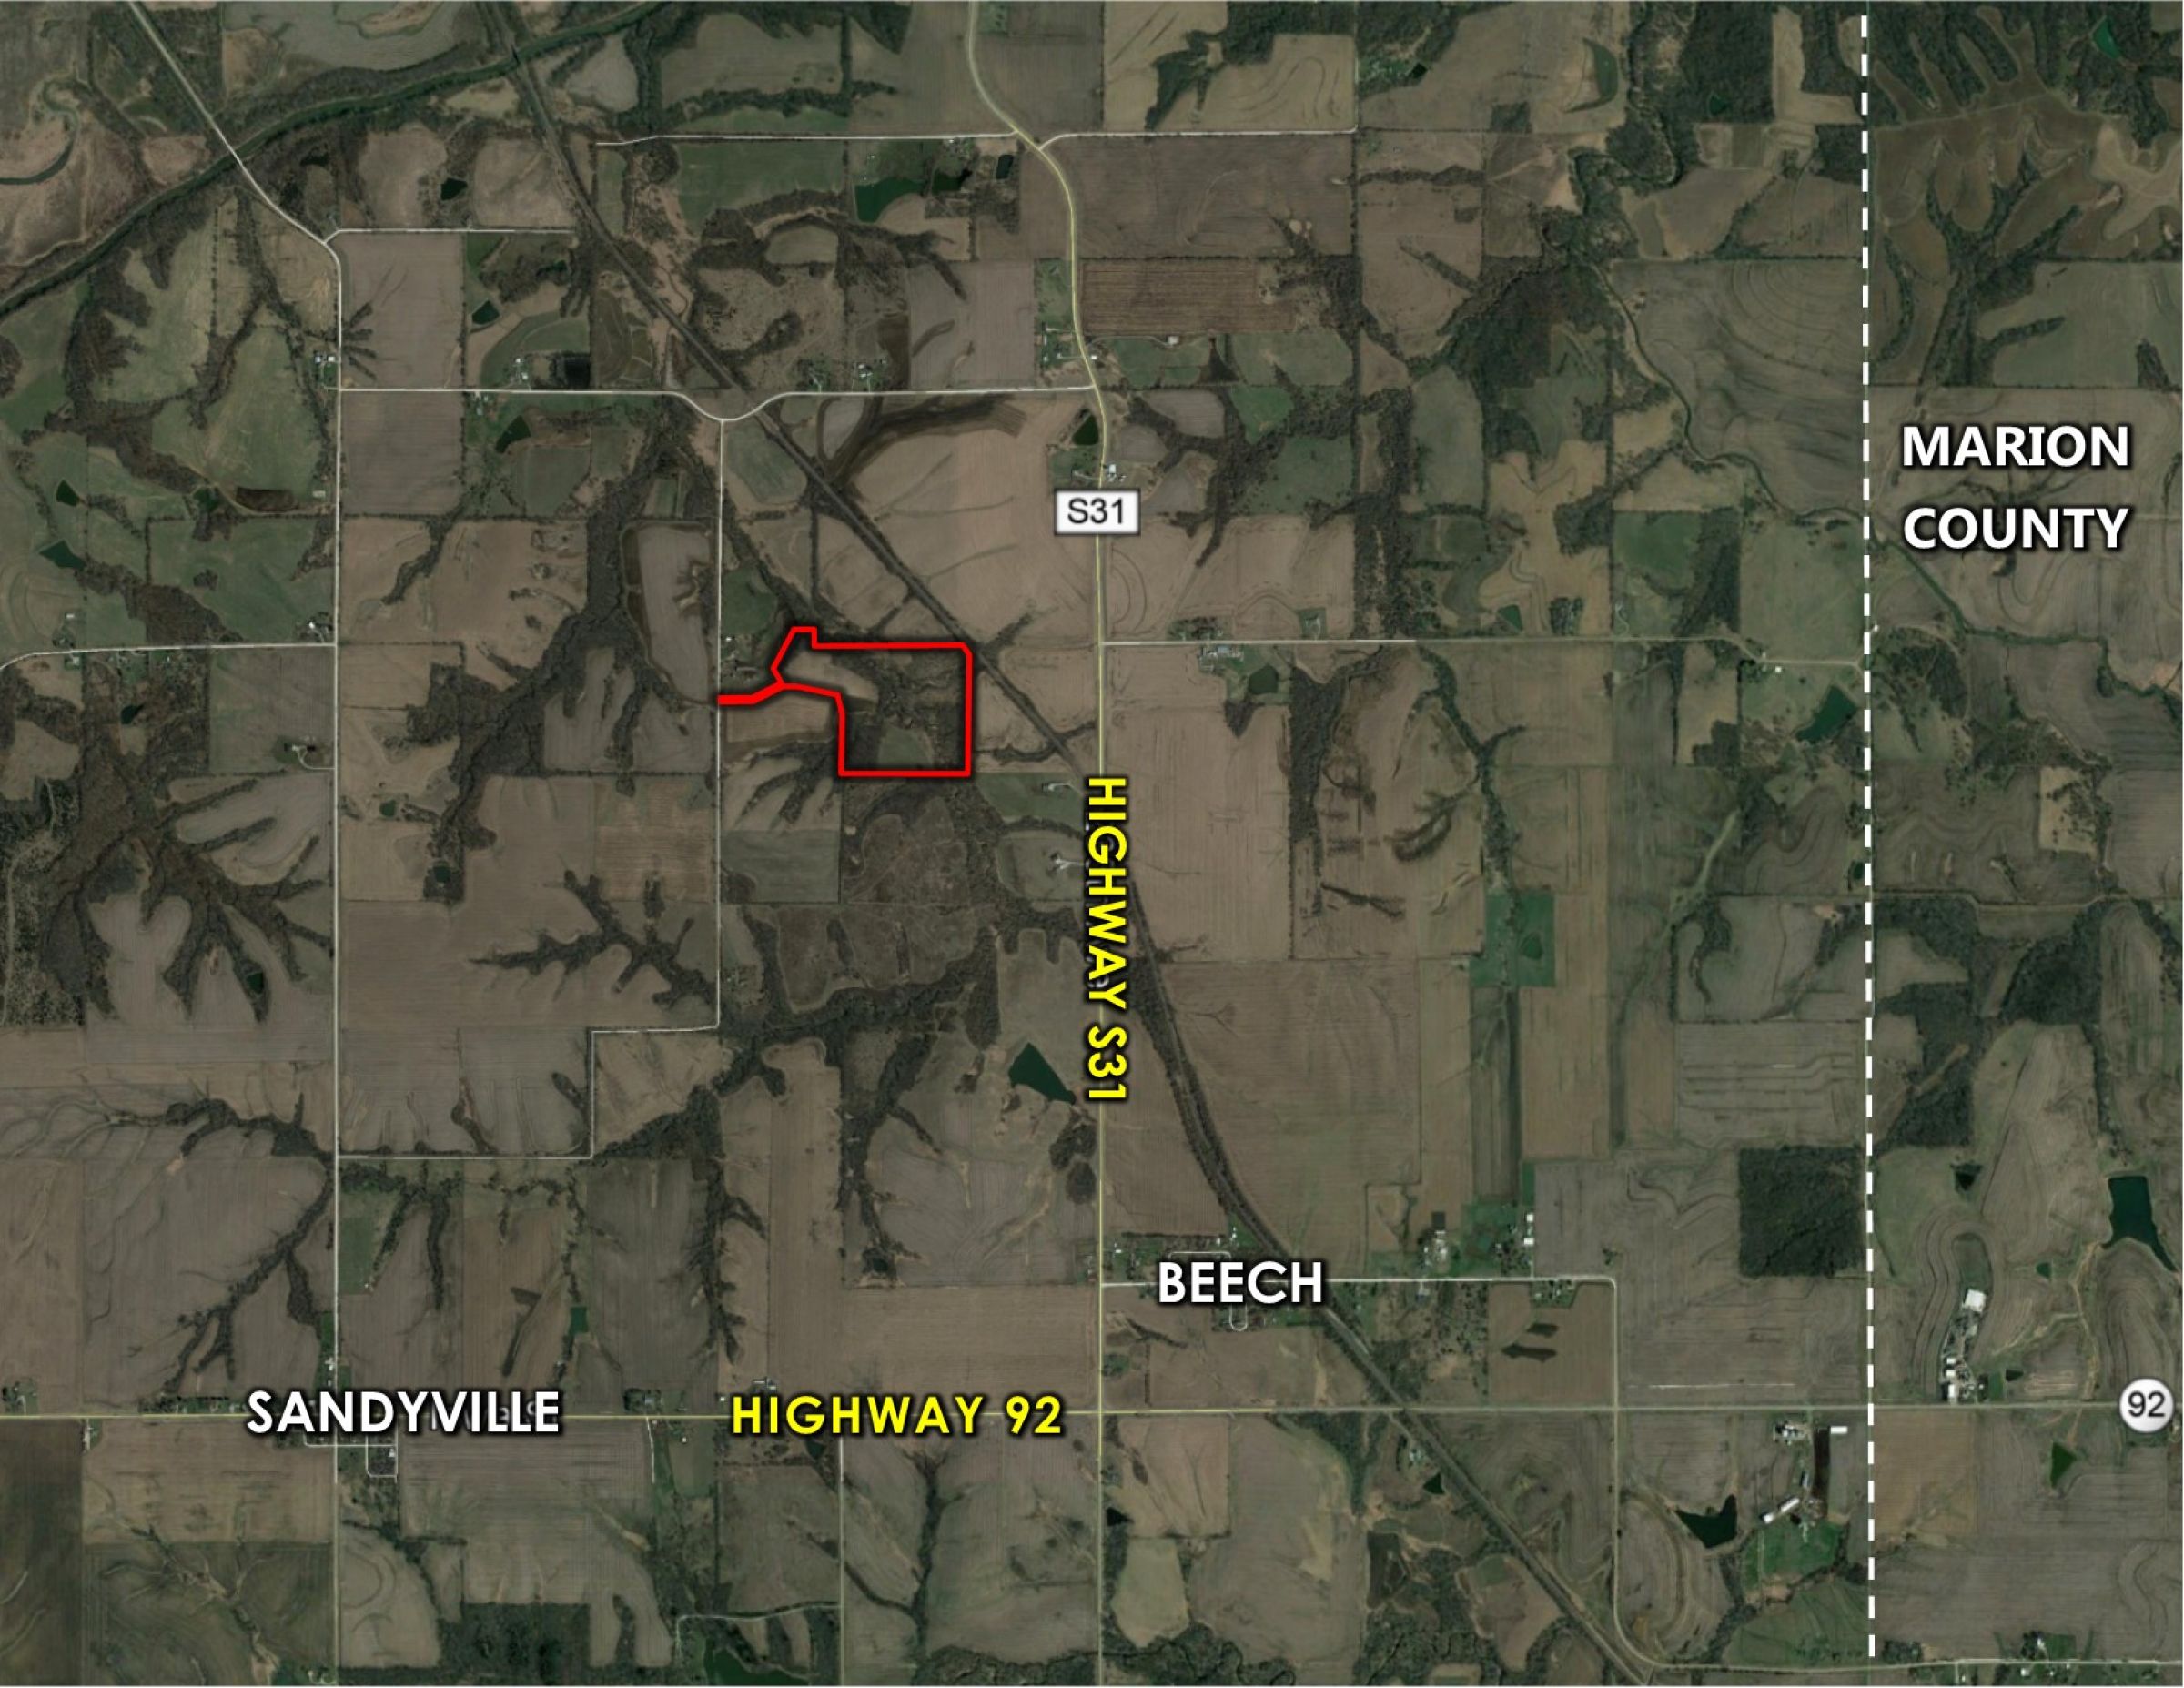 Peoples Company Land For Sale - Warren County Iowa - #14443 - 9109-228th-avenue-ackworth-50001